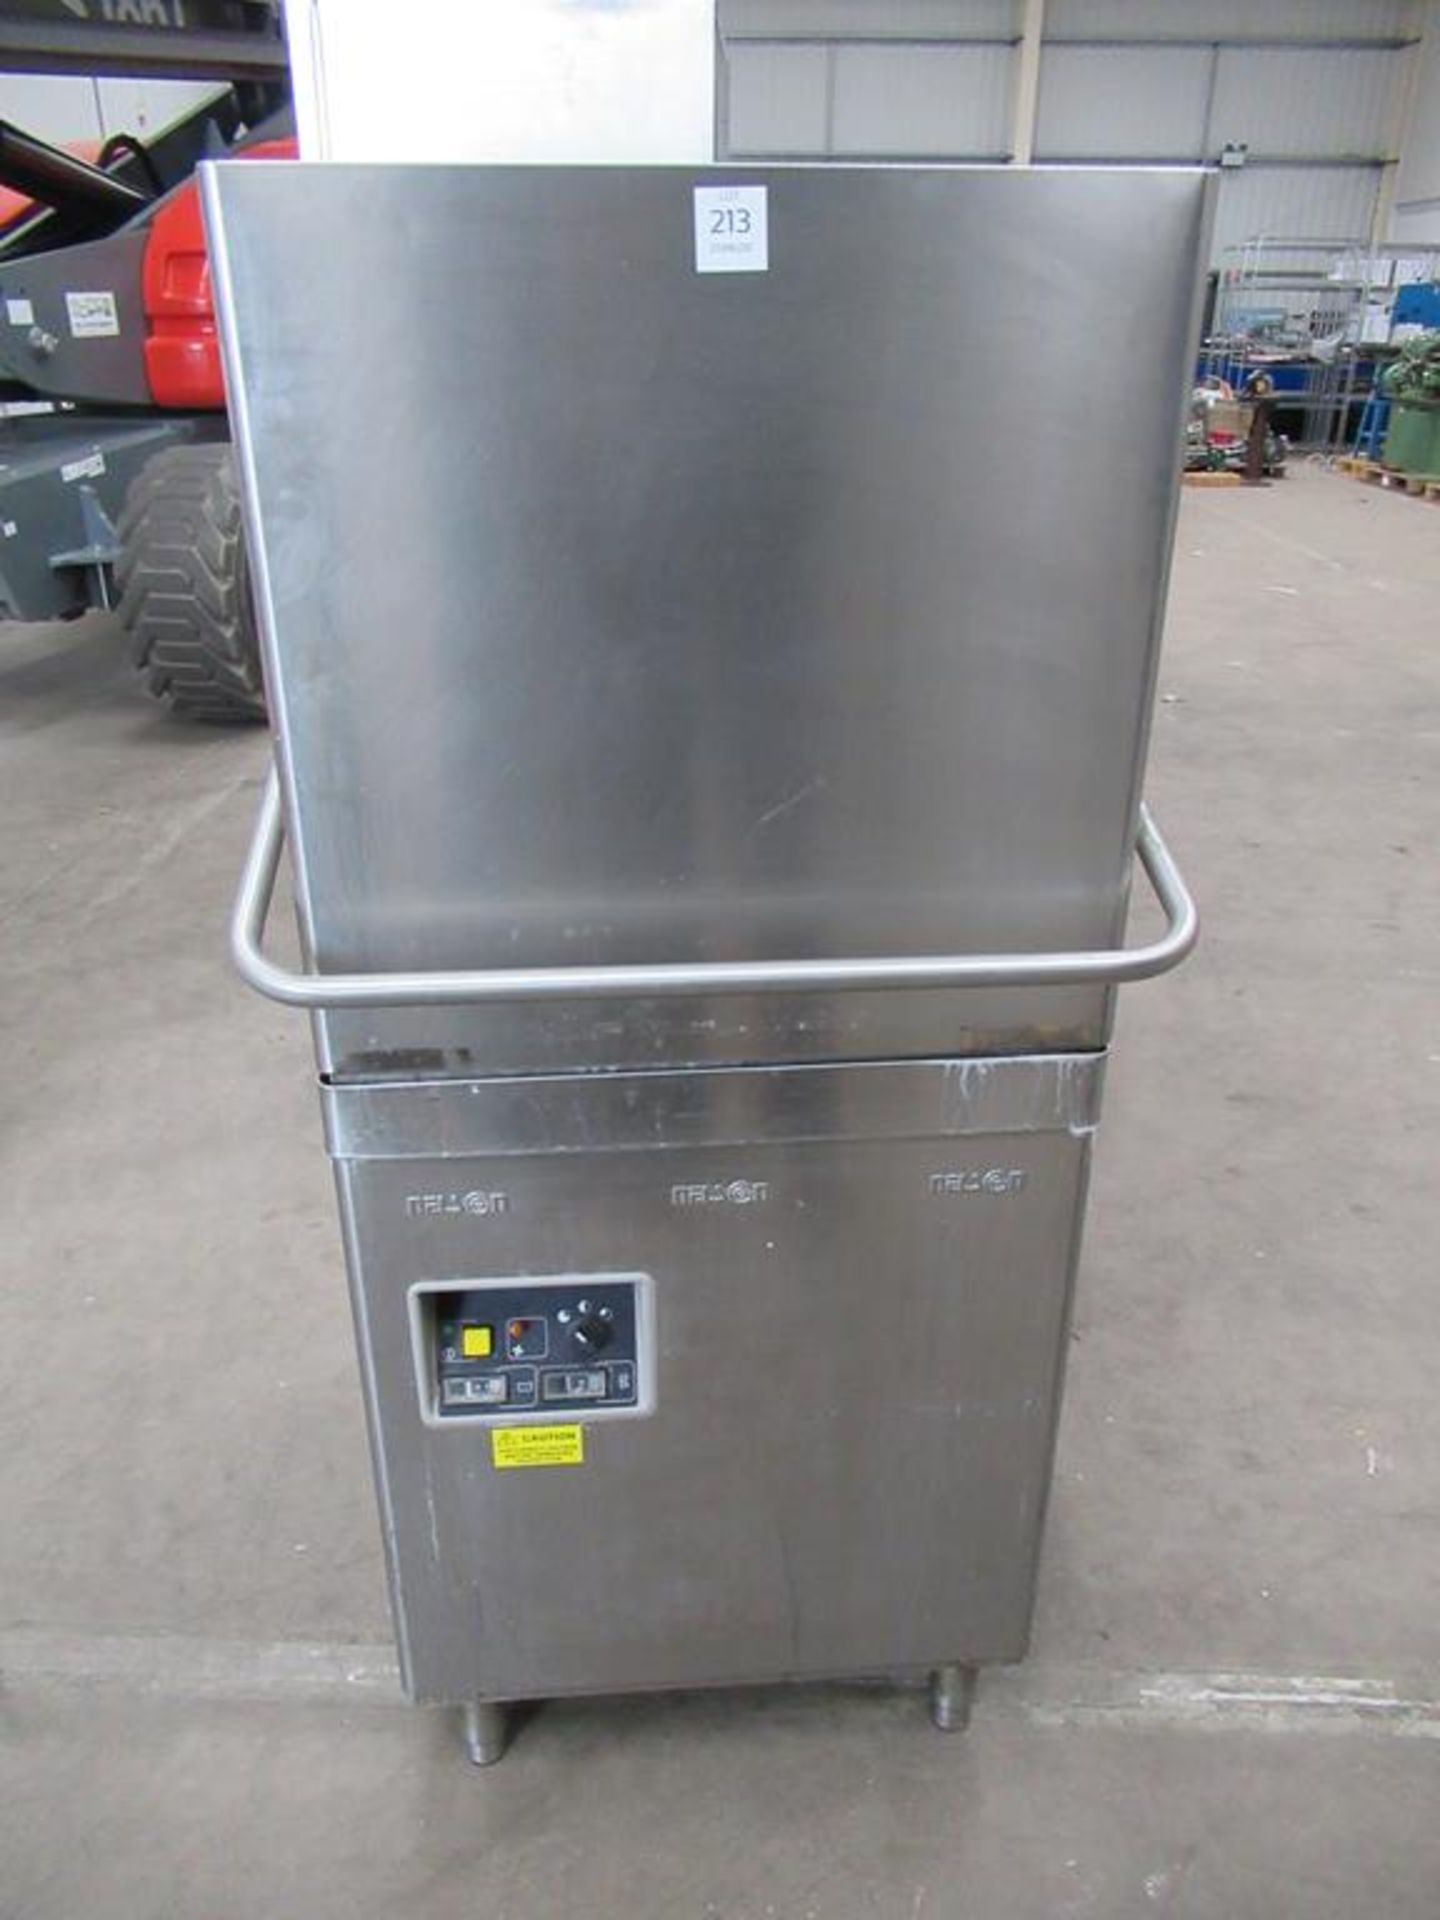 Nelson stainless steel dishwasher